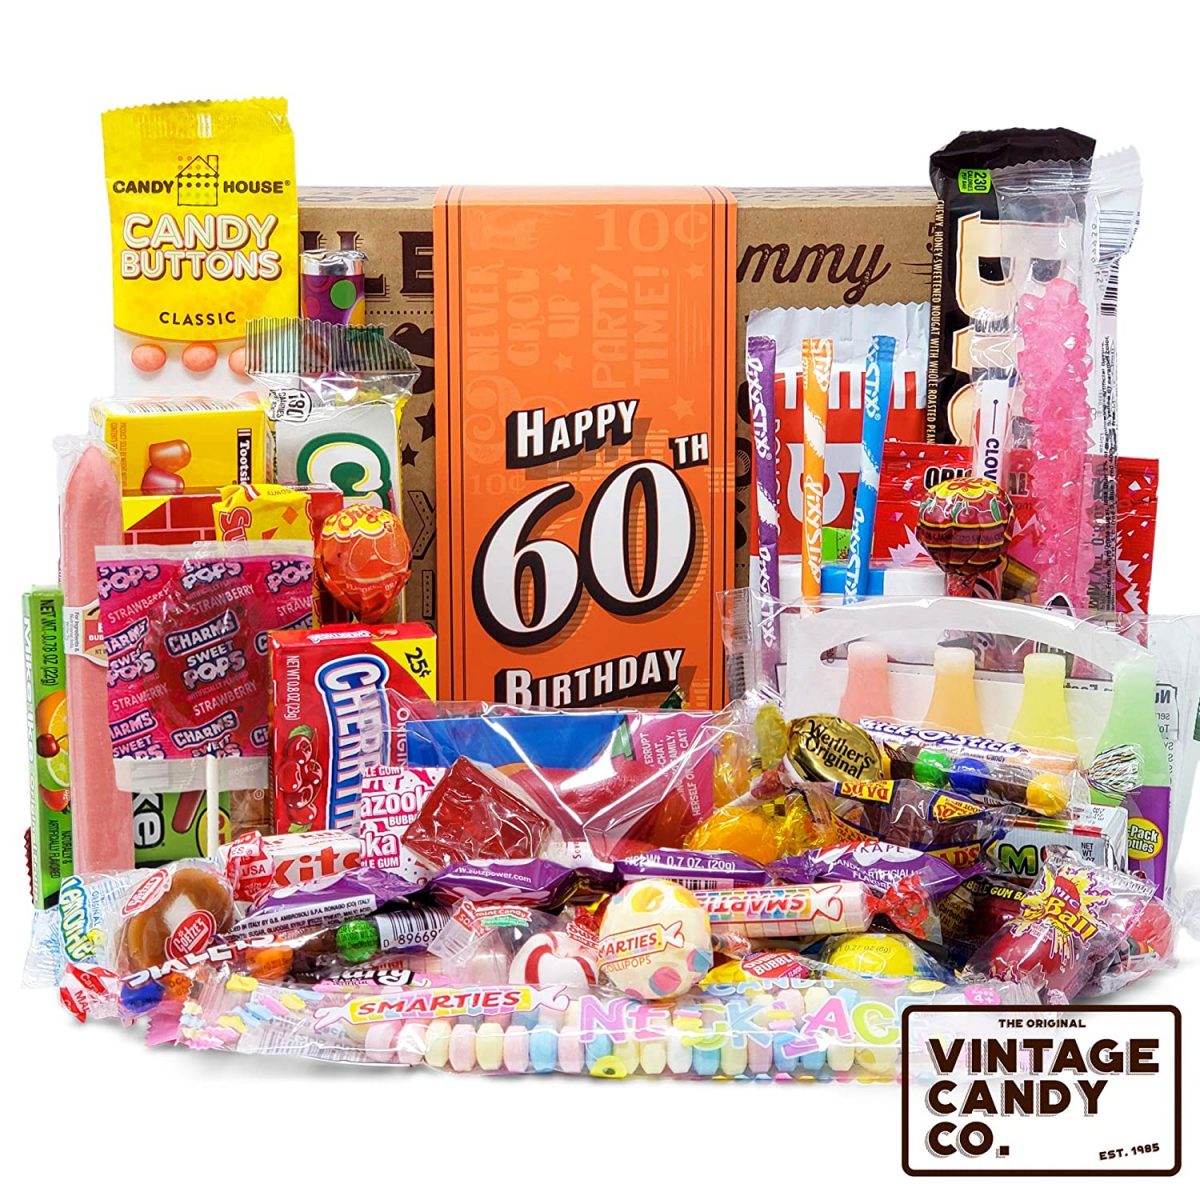 VINTAGE CANDY CO. 60TH BIRTHDAY RETRO CANDY GIFT BOX